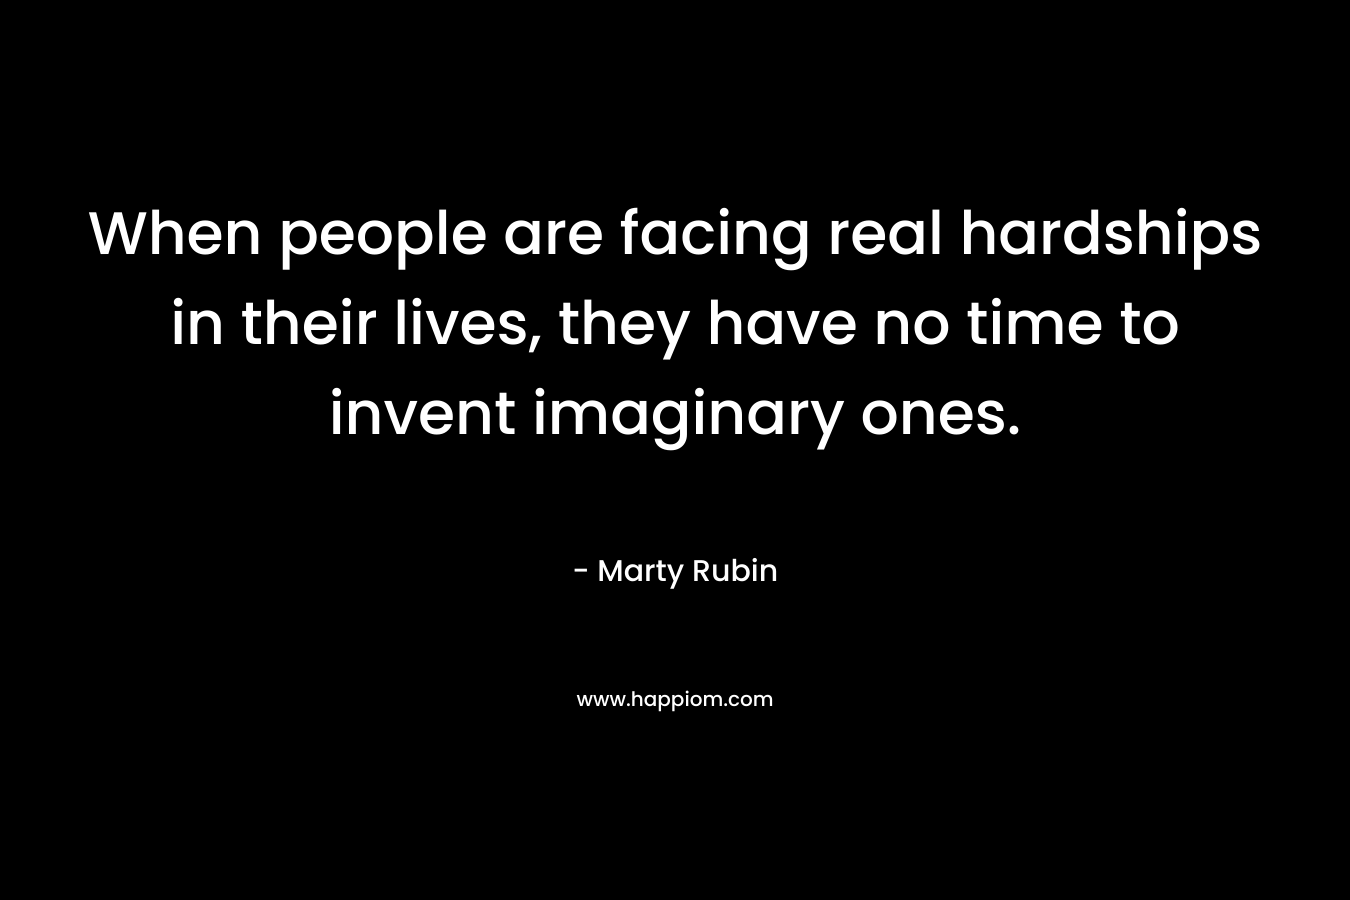 When people are facing real hardships in their lives, they have no time to invent imaginary ones.